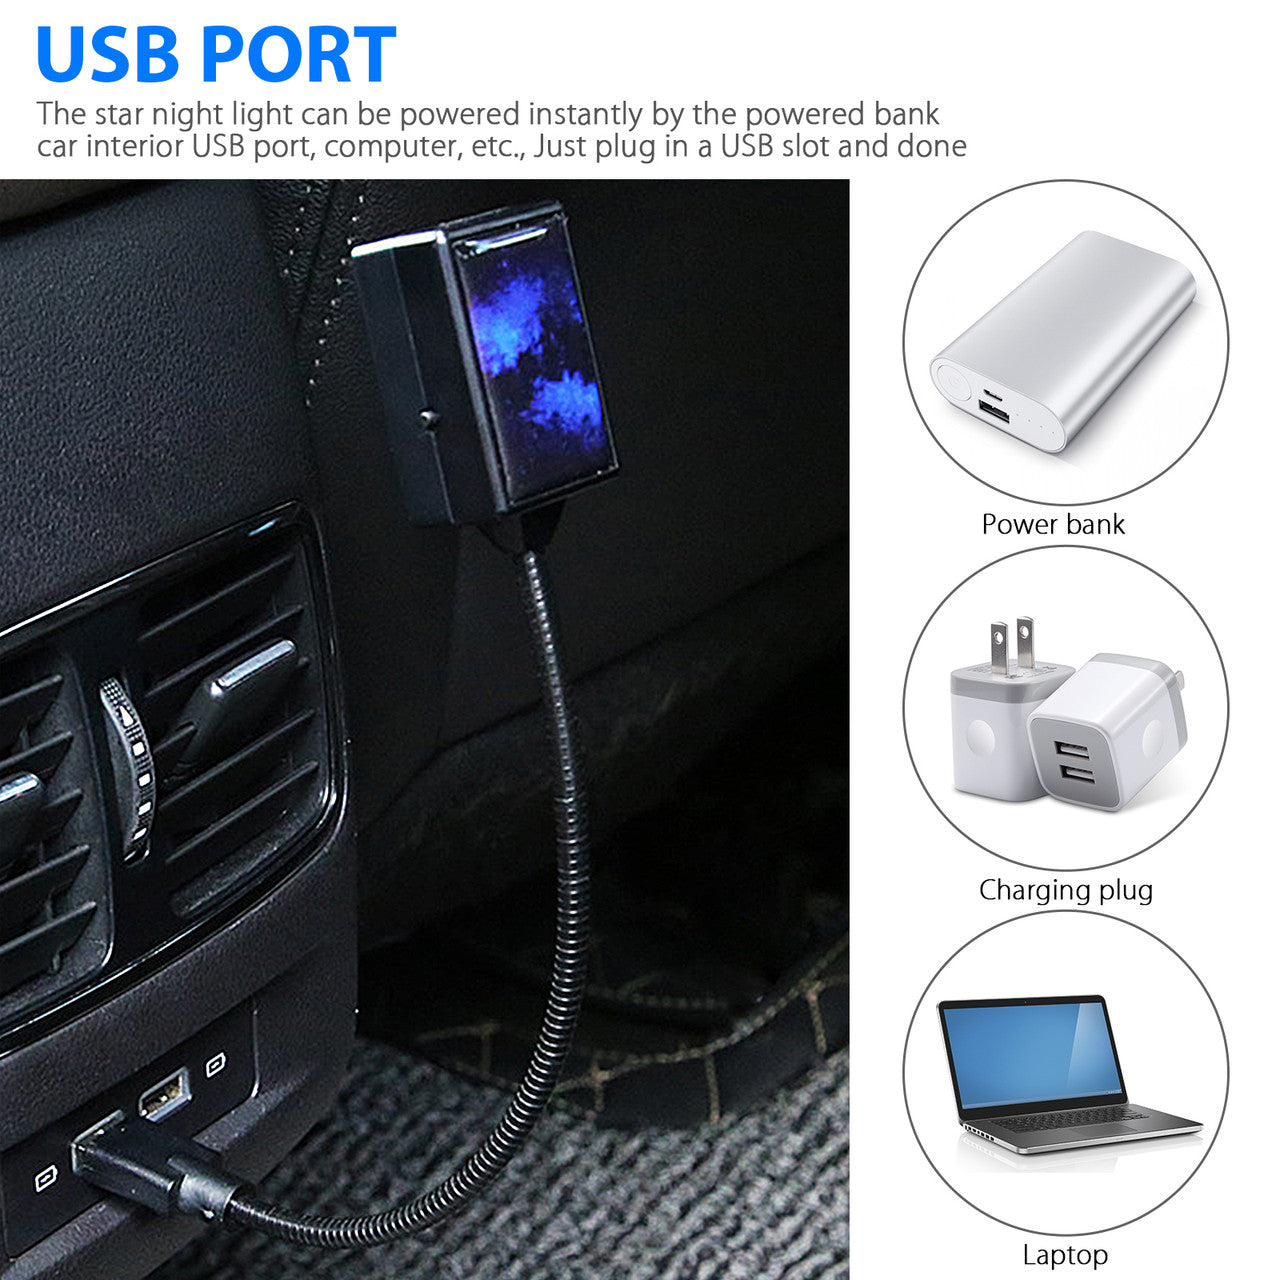 USB Star Projector LED Light Ambient Starry Night Sky Atmosphere Car Interior